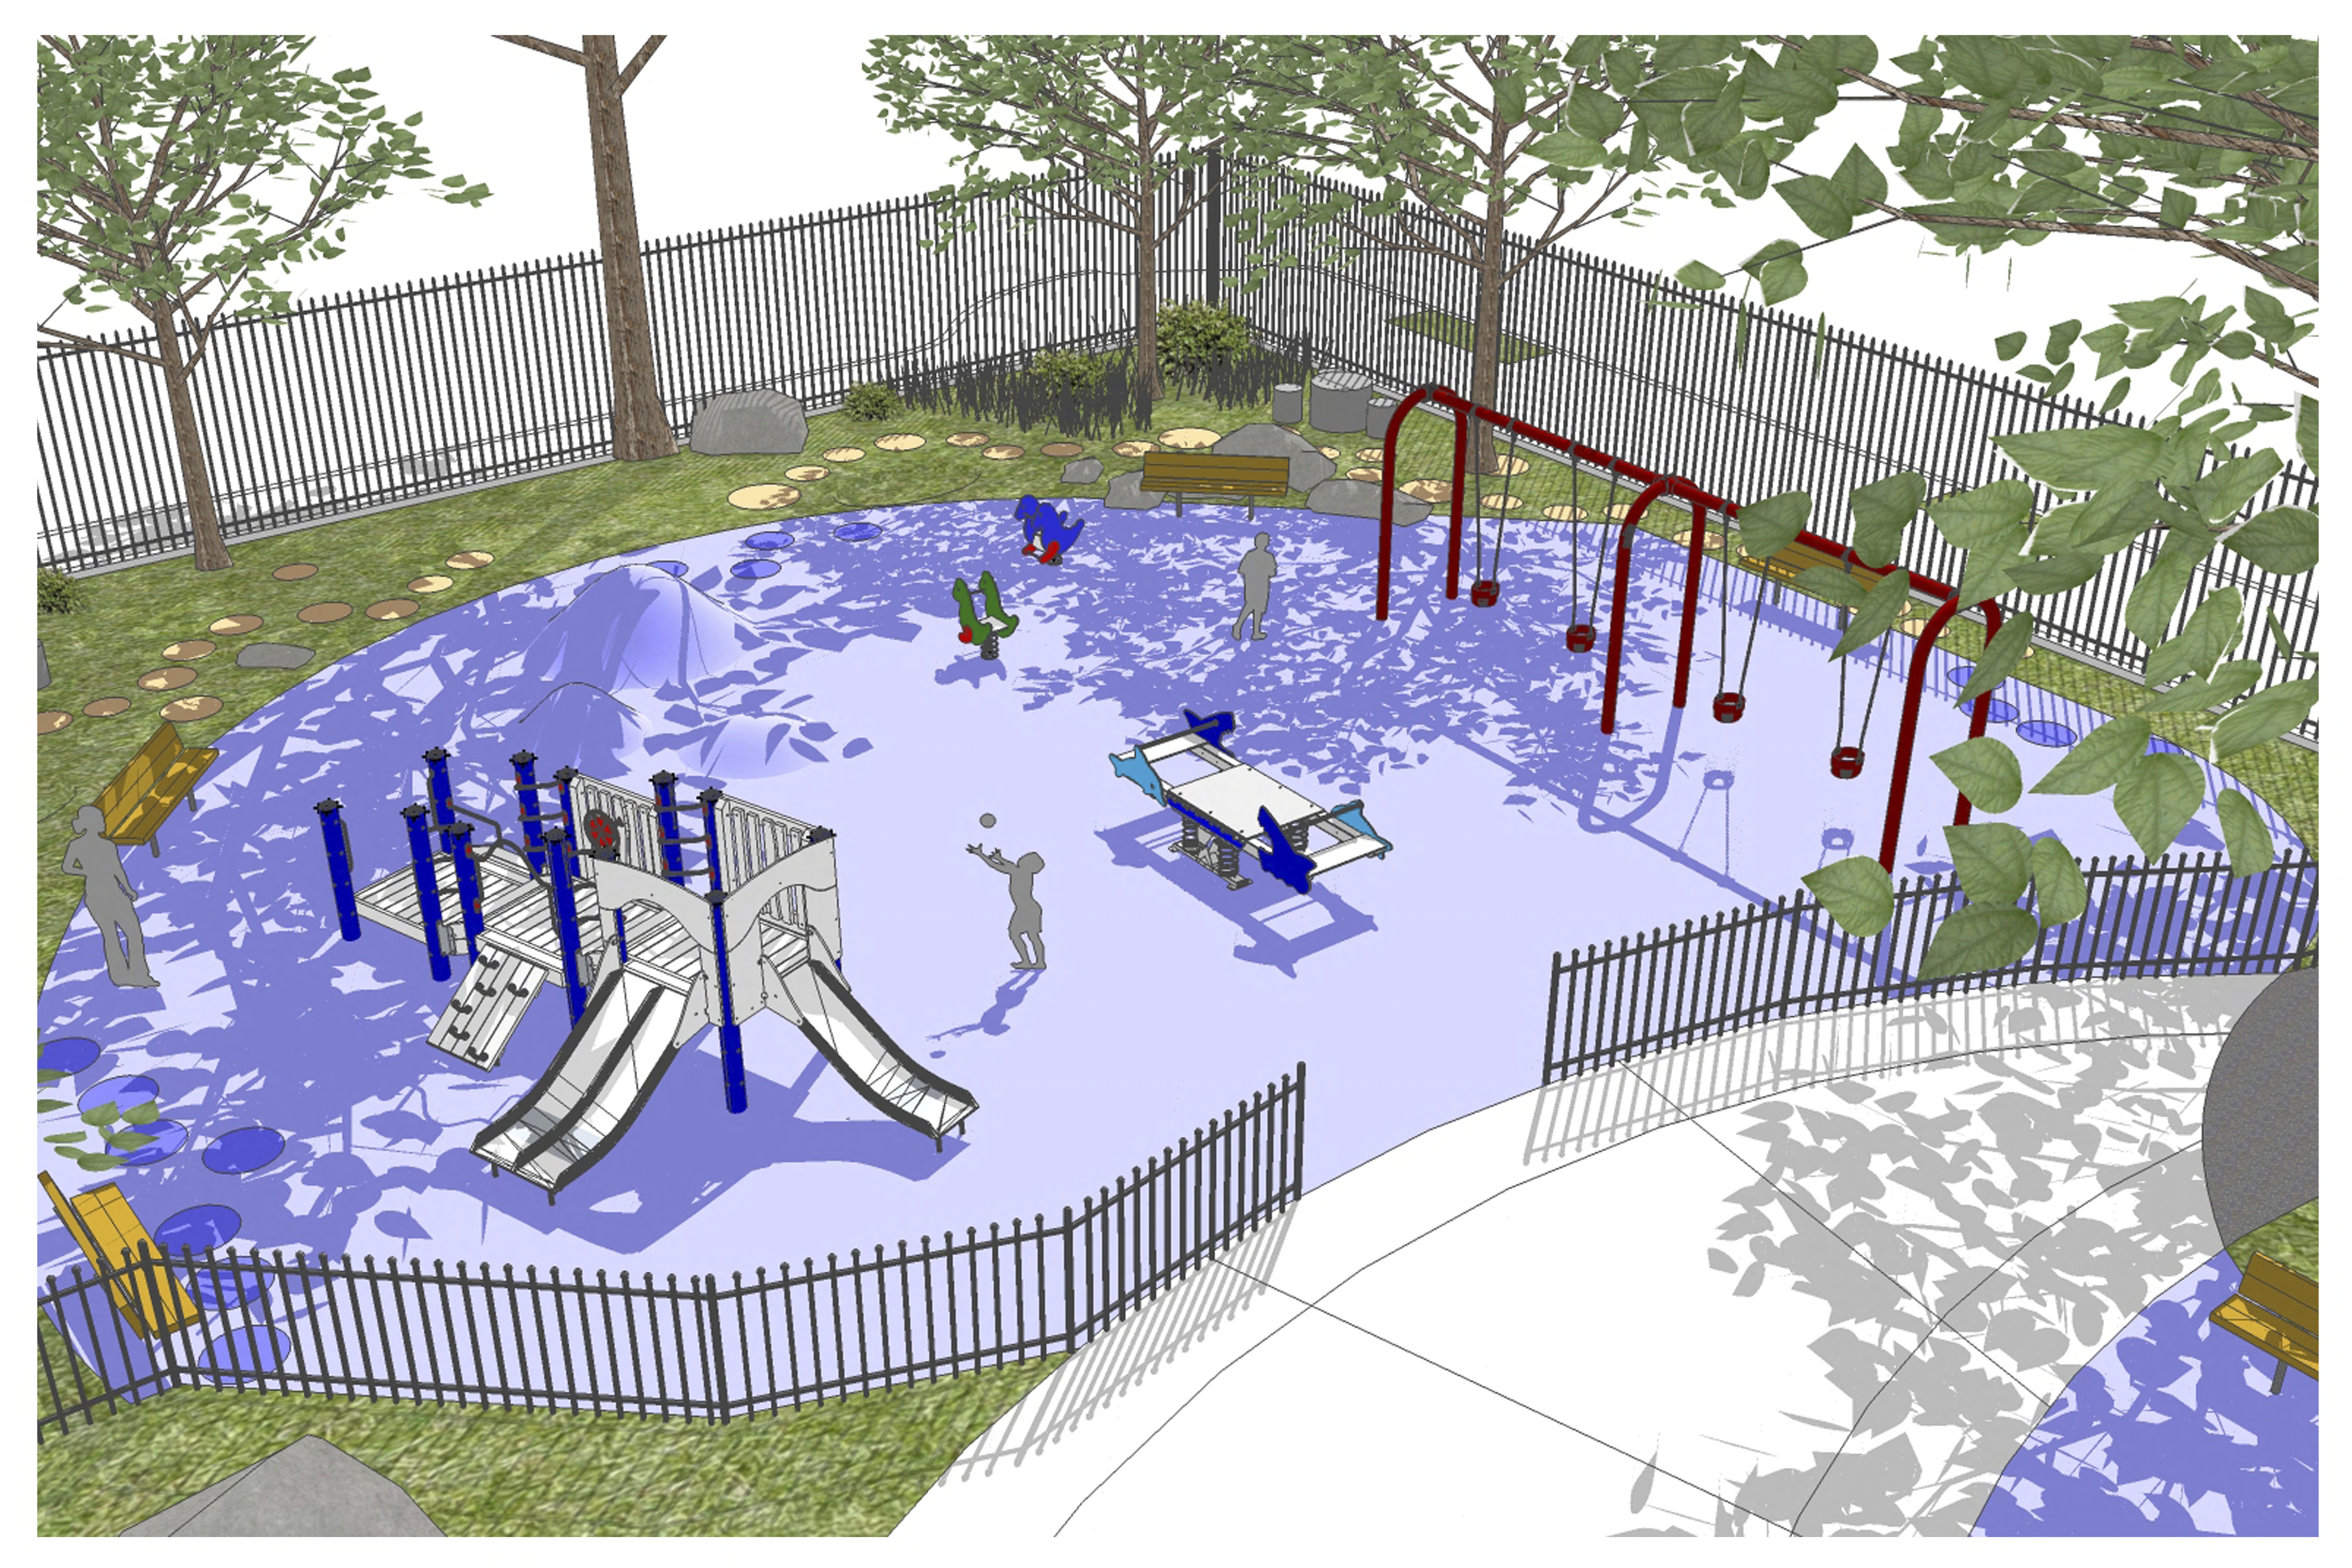 Designs for Seger Park's future tot lot. | Friends of Seger Park Playground